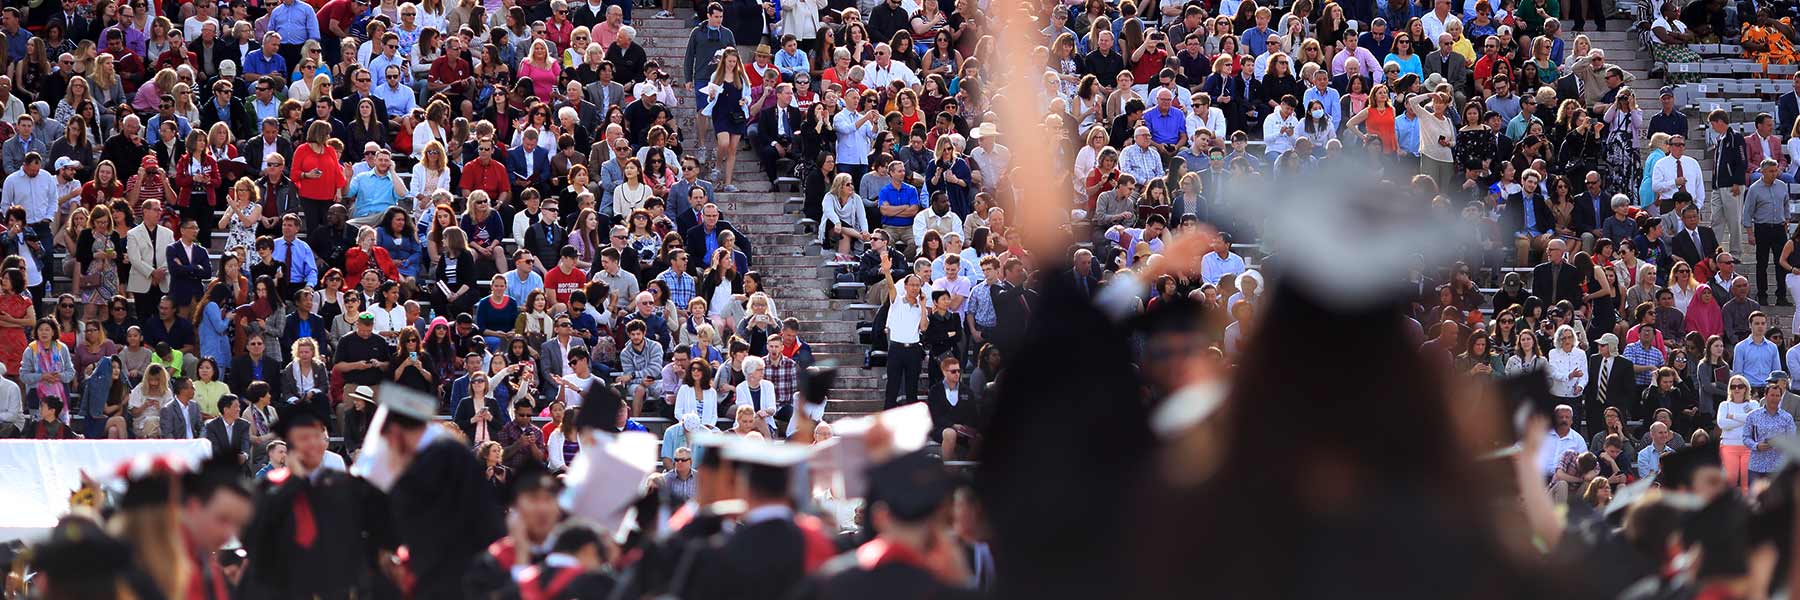 A student reaches toward the sky during graduation as she looks toward the large crowd of attendees.